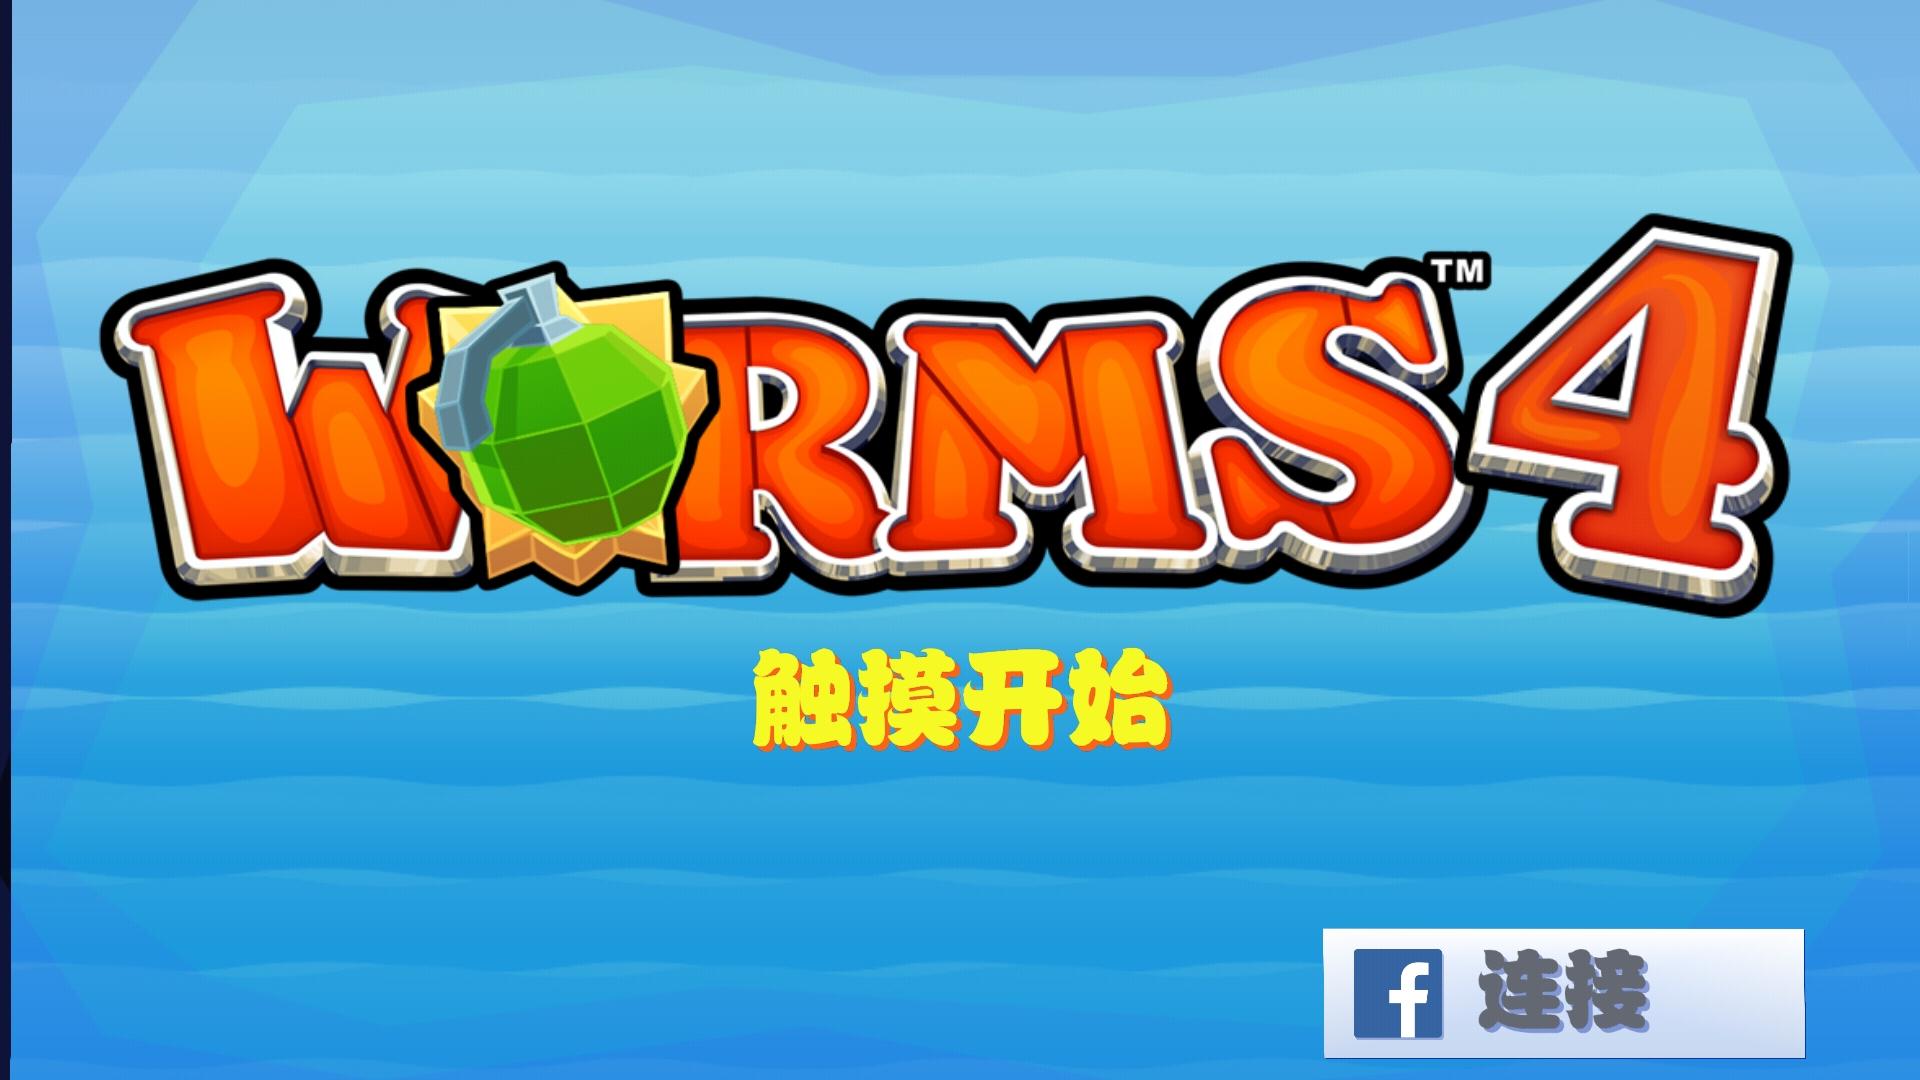 Worms 4 